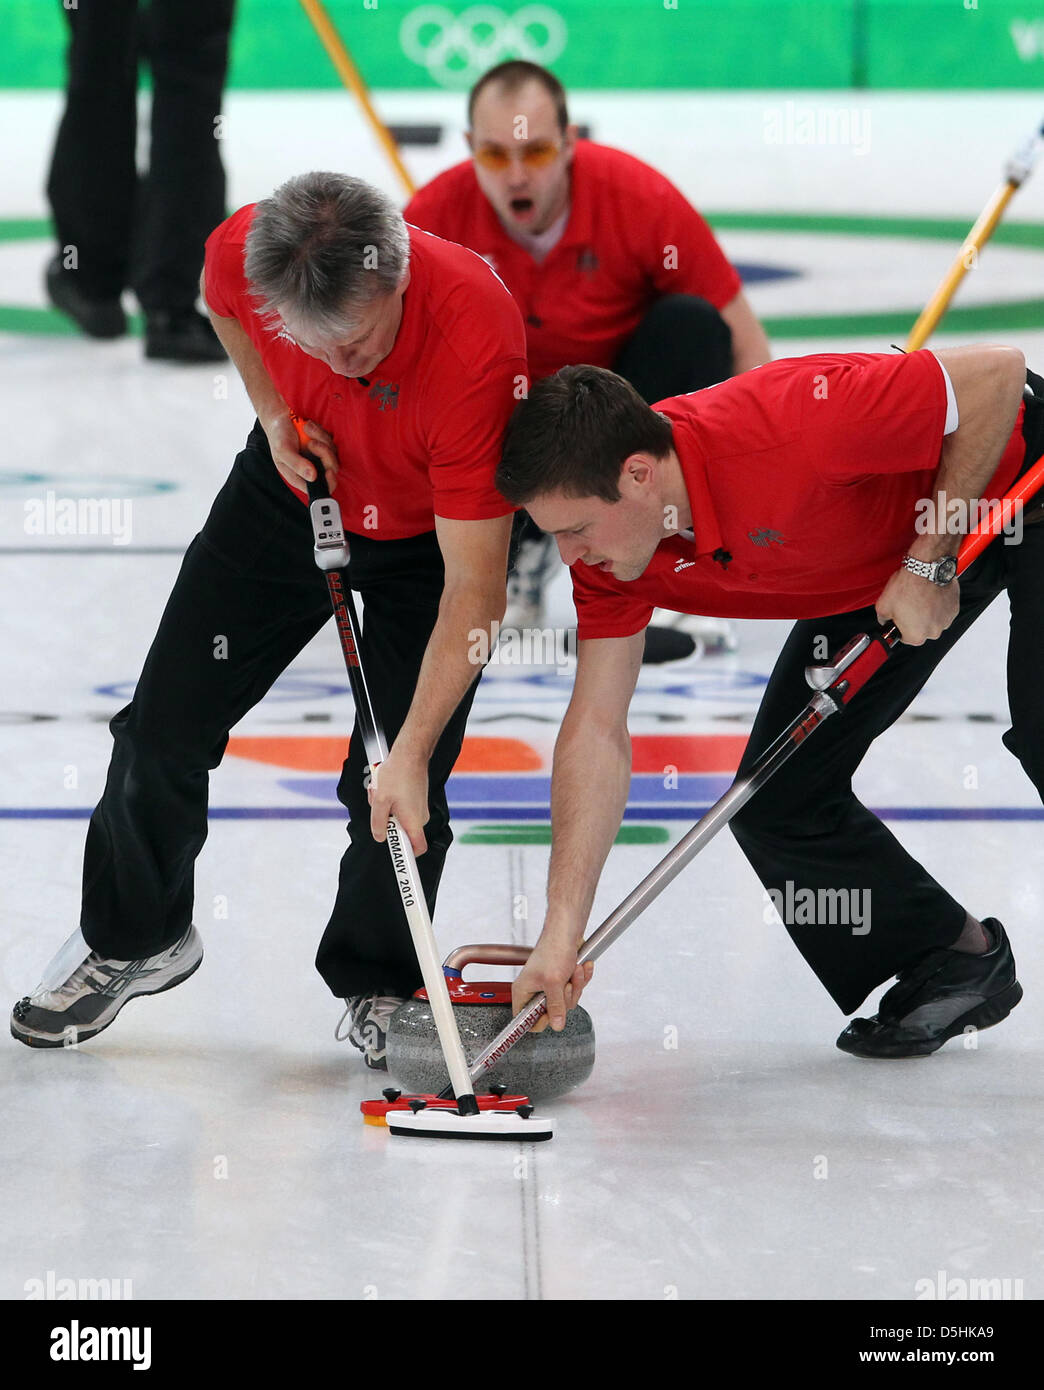 Holger Hoehne (C) of Germany releases his stone as Andreas Kempf (L) and Andy Lang guide it during Curling men's round robin session 3 at the Olympic Center during the Vancouver 2010 Olympic Games in Vancouver, Canada 17 February 2010. Germany's opponent was Sweden. Photo: Daniel Karmann  +++(c) dpa - Bildfunk+++ Stock Photo